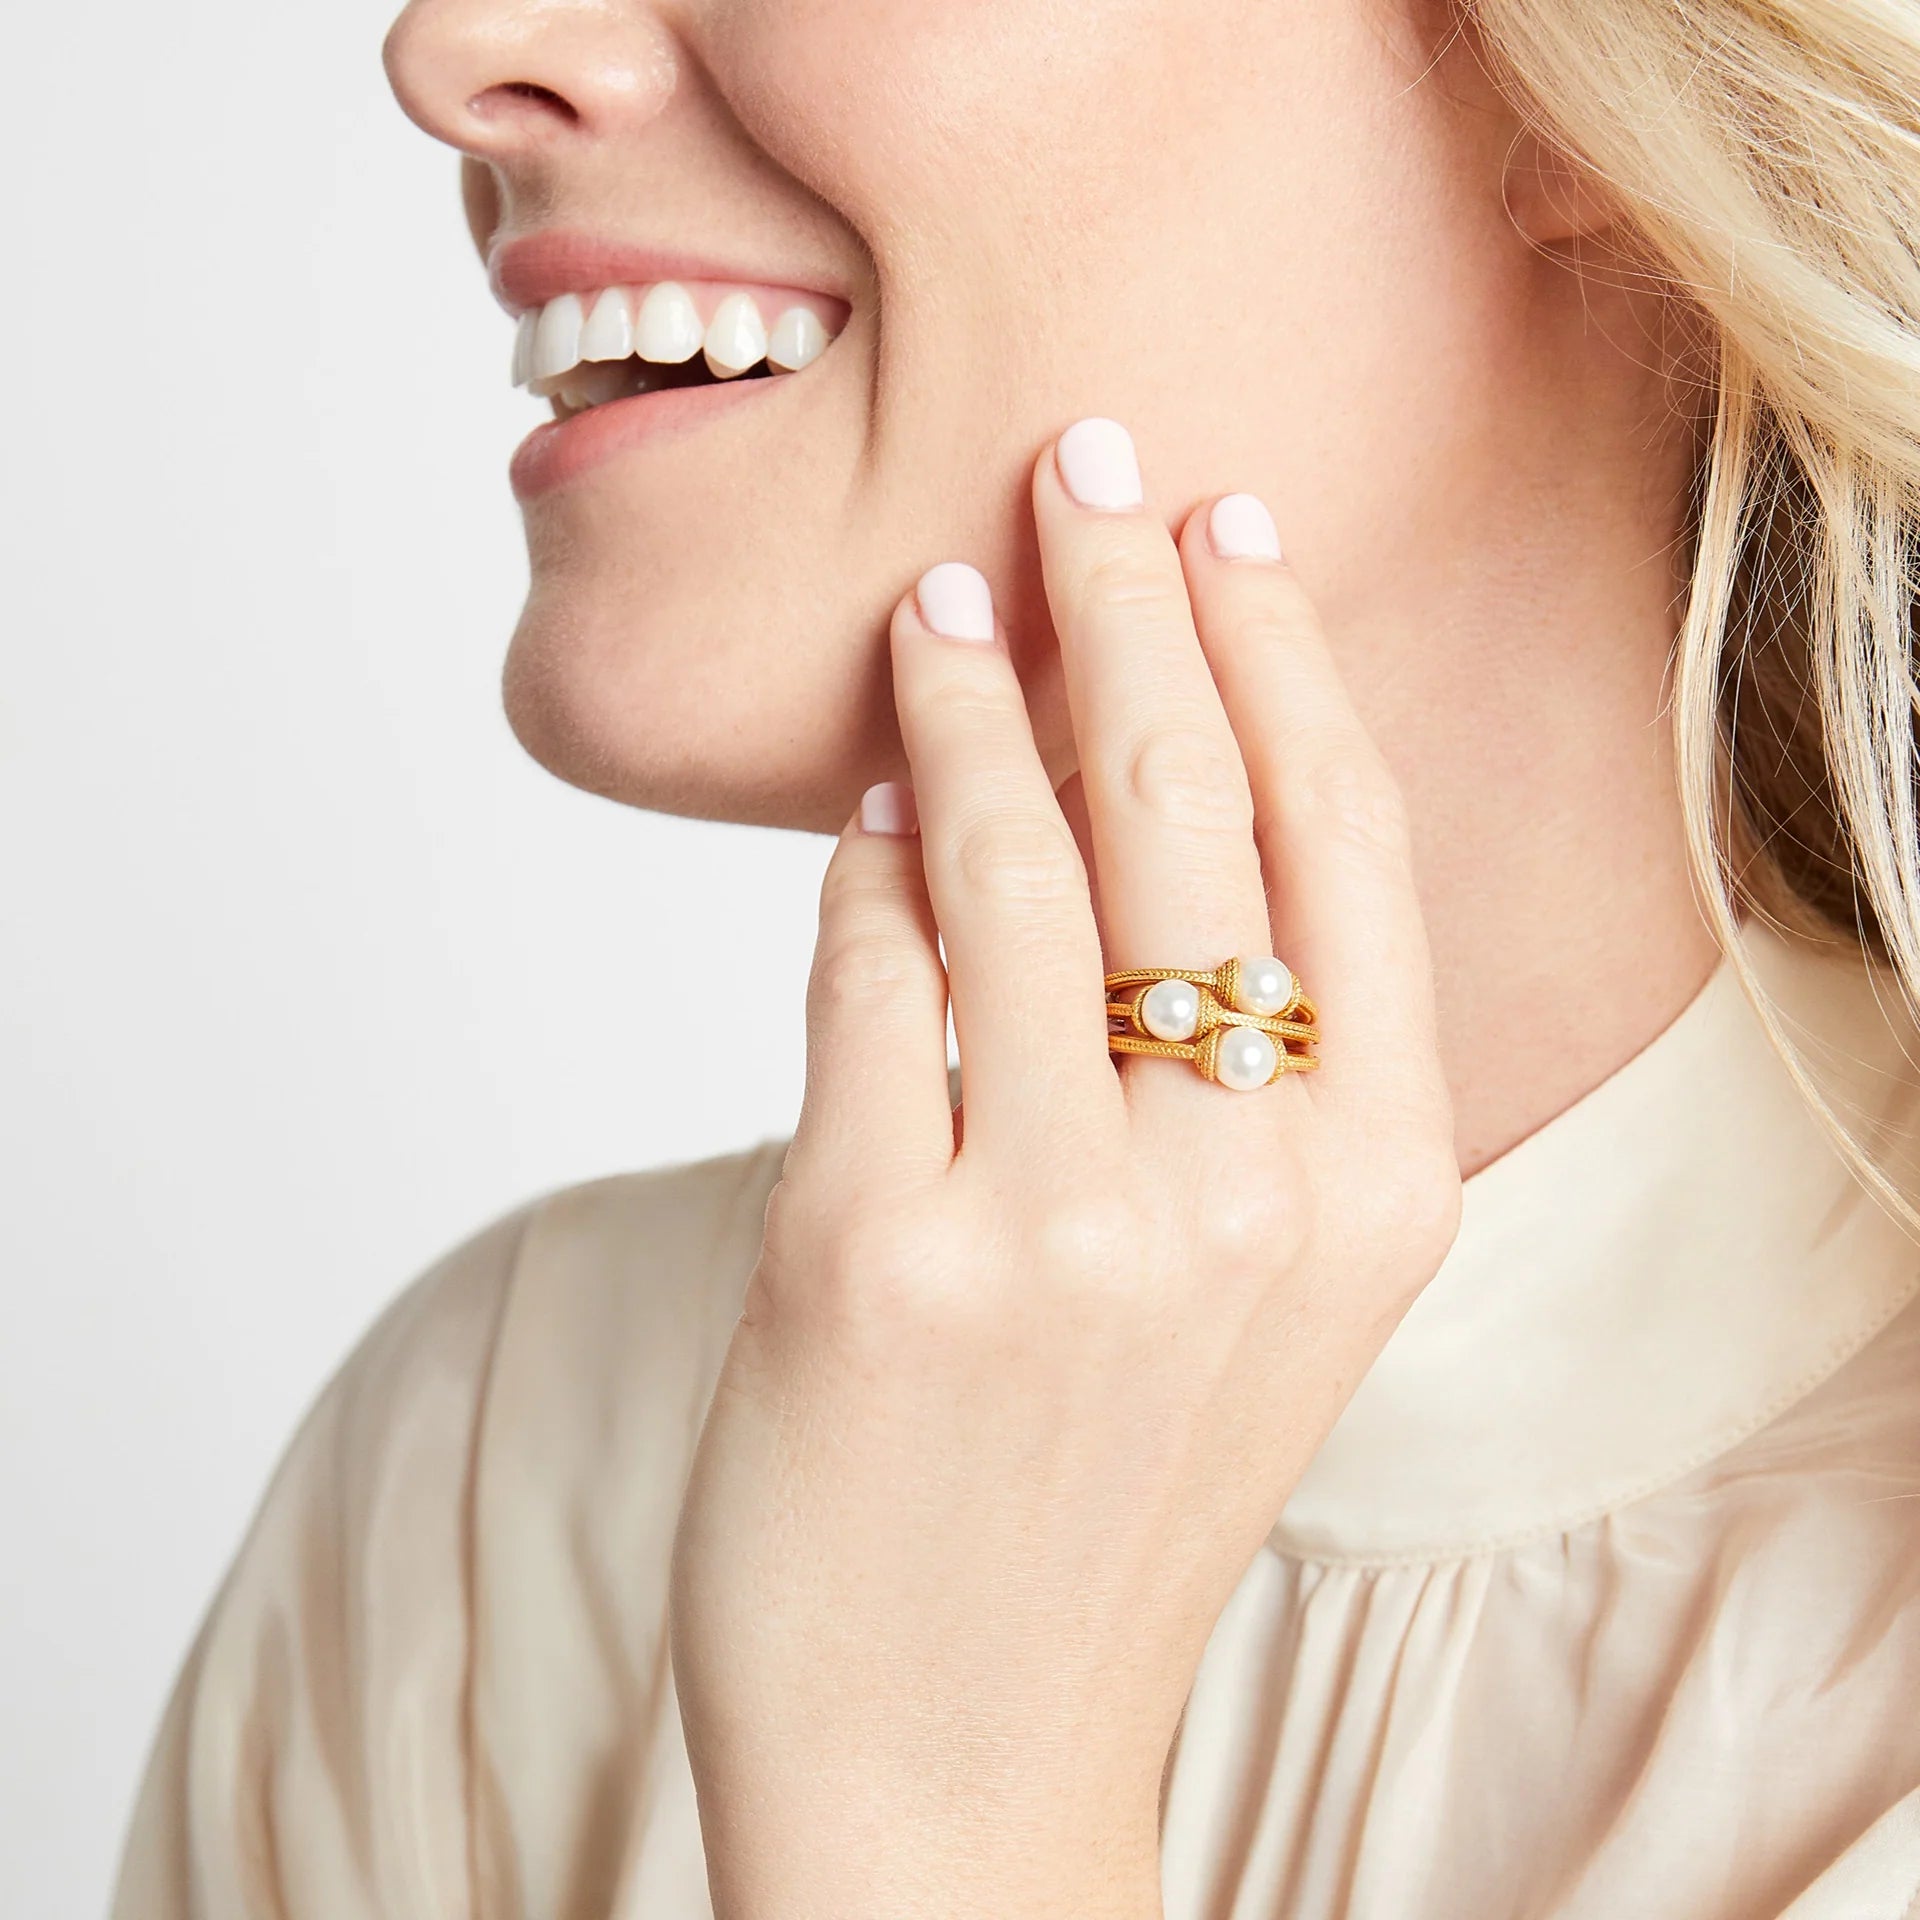 Calypso PRL Stack Ring Set 3-9 by Julie Vos features three pearl rings to stack together or wear separately. 24K gold plate. Shop at The Painted Cottage in Edgewater, MD.